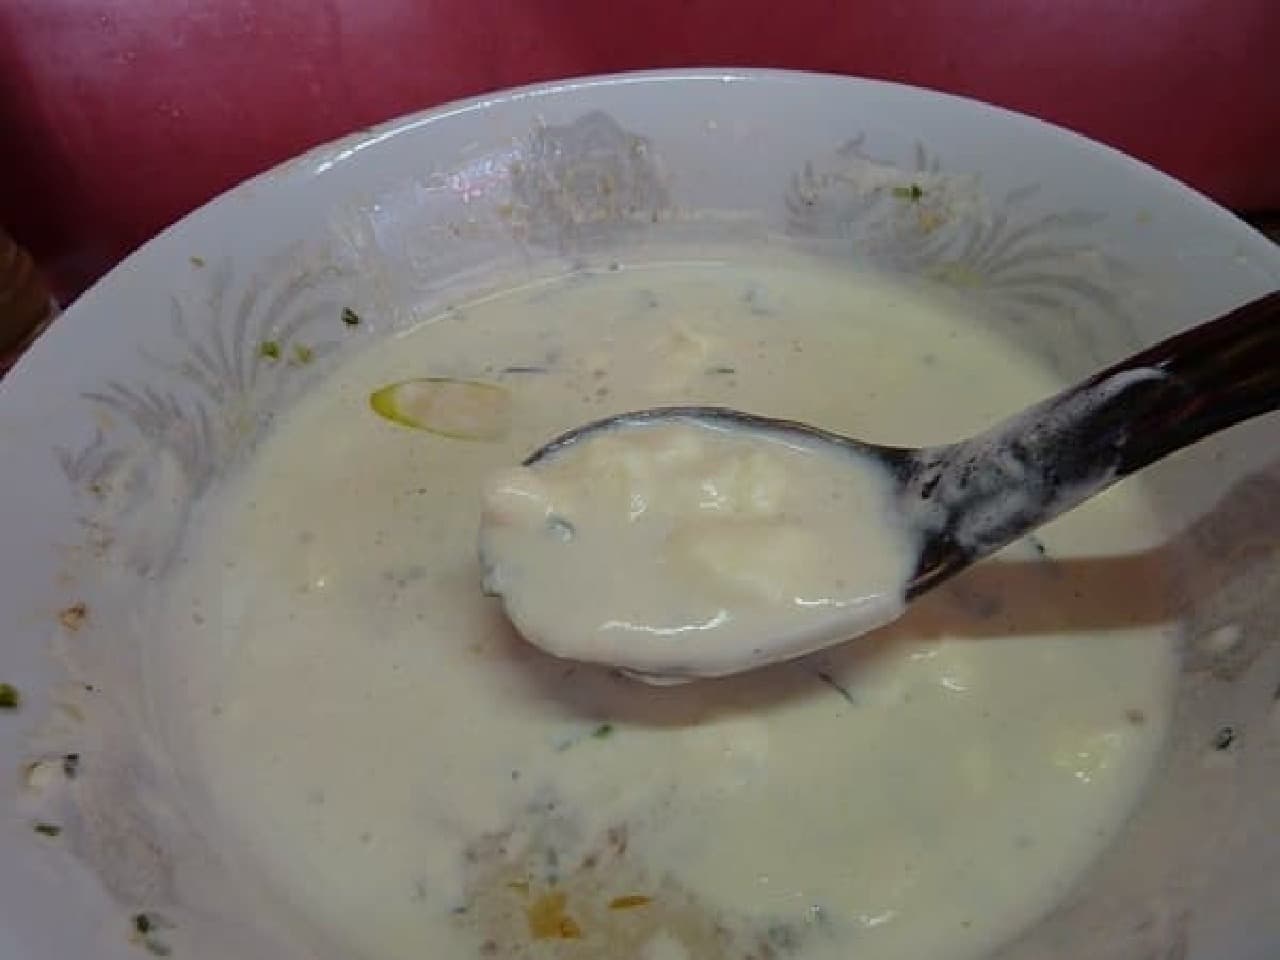 Finished eating soup creamy!